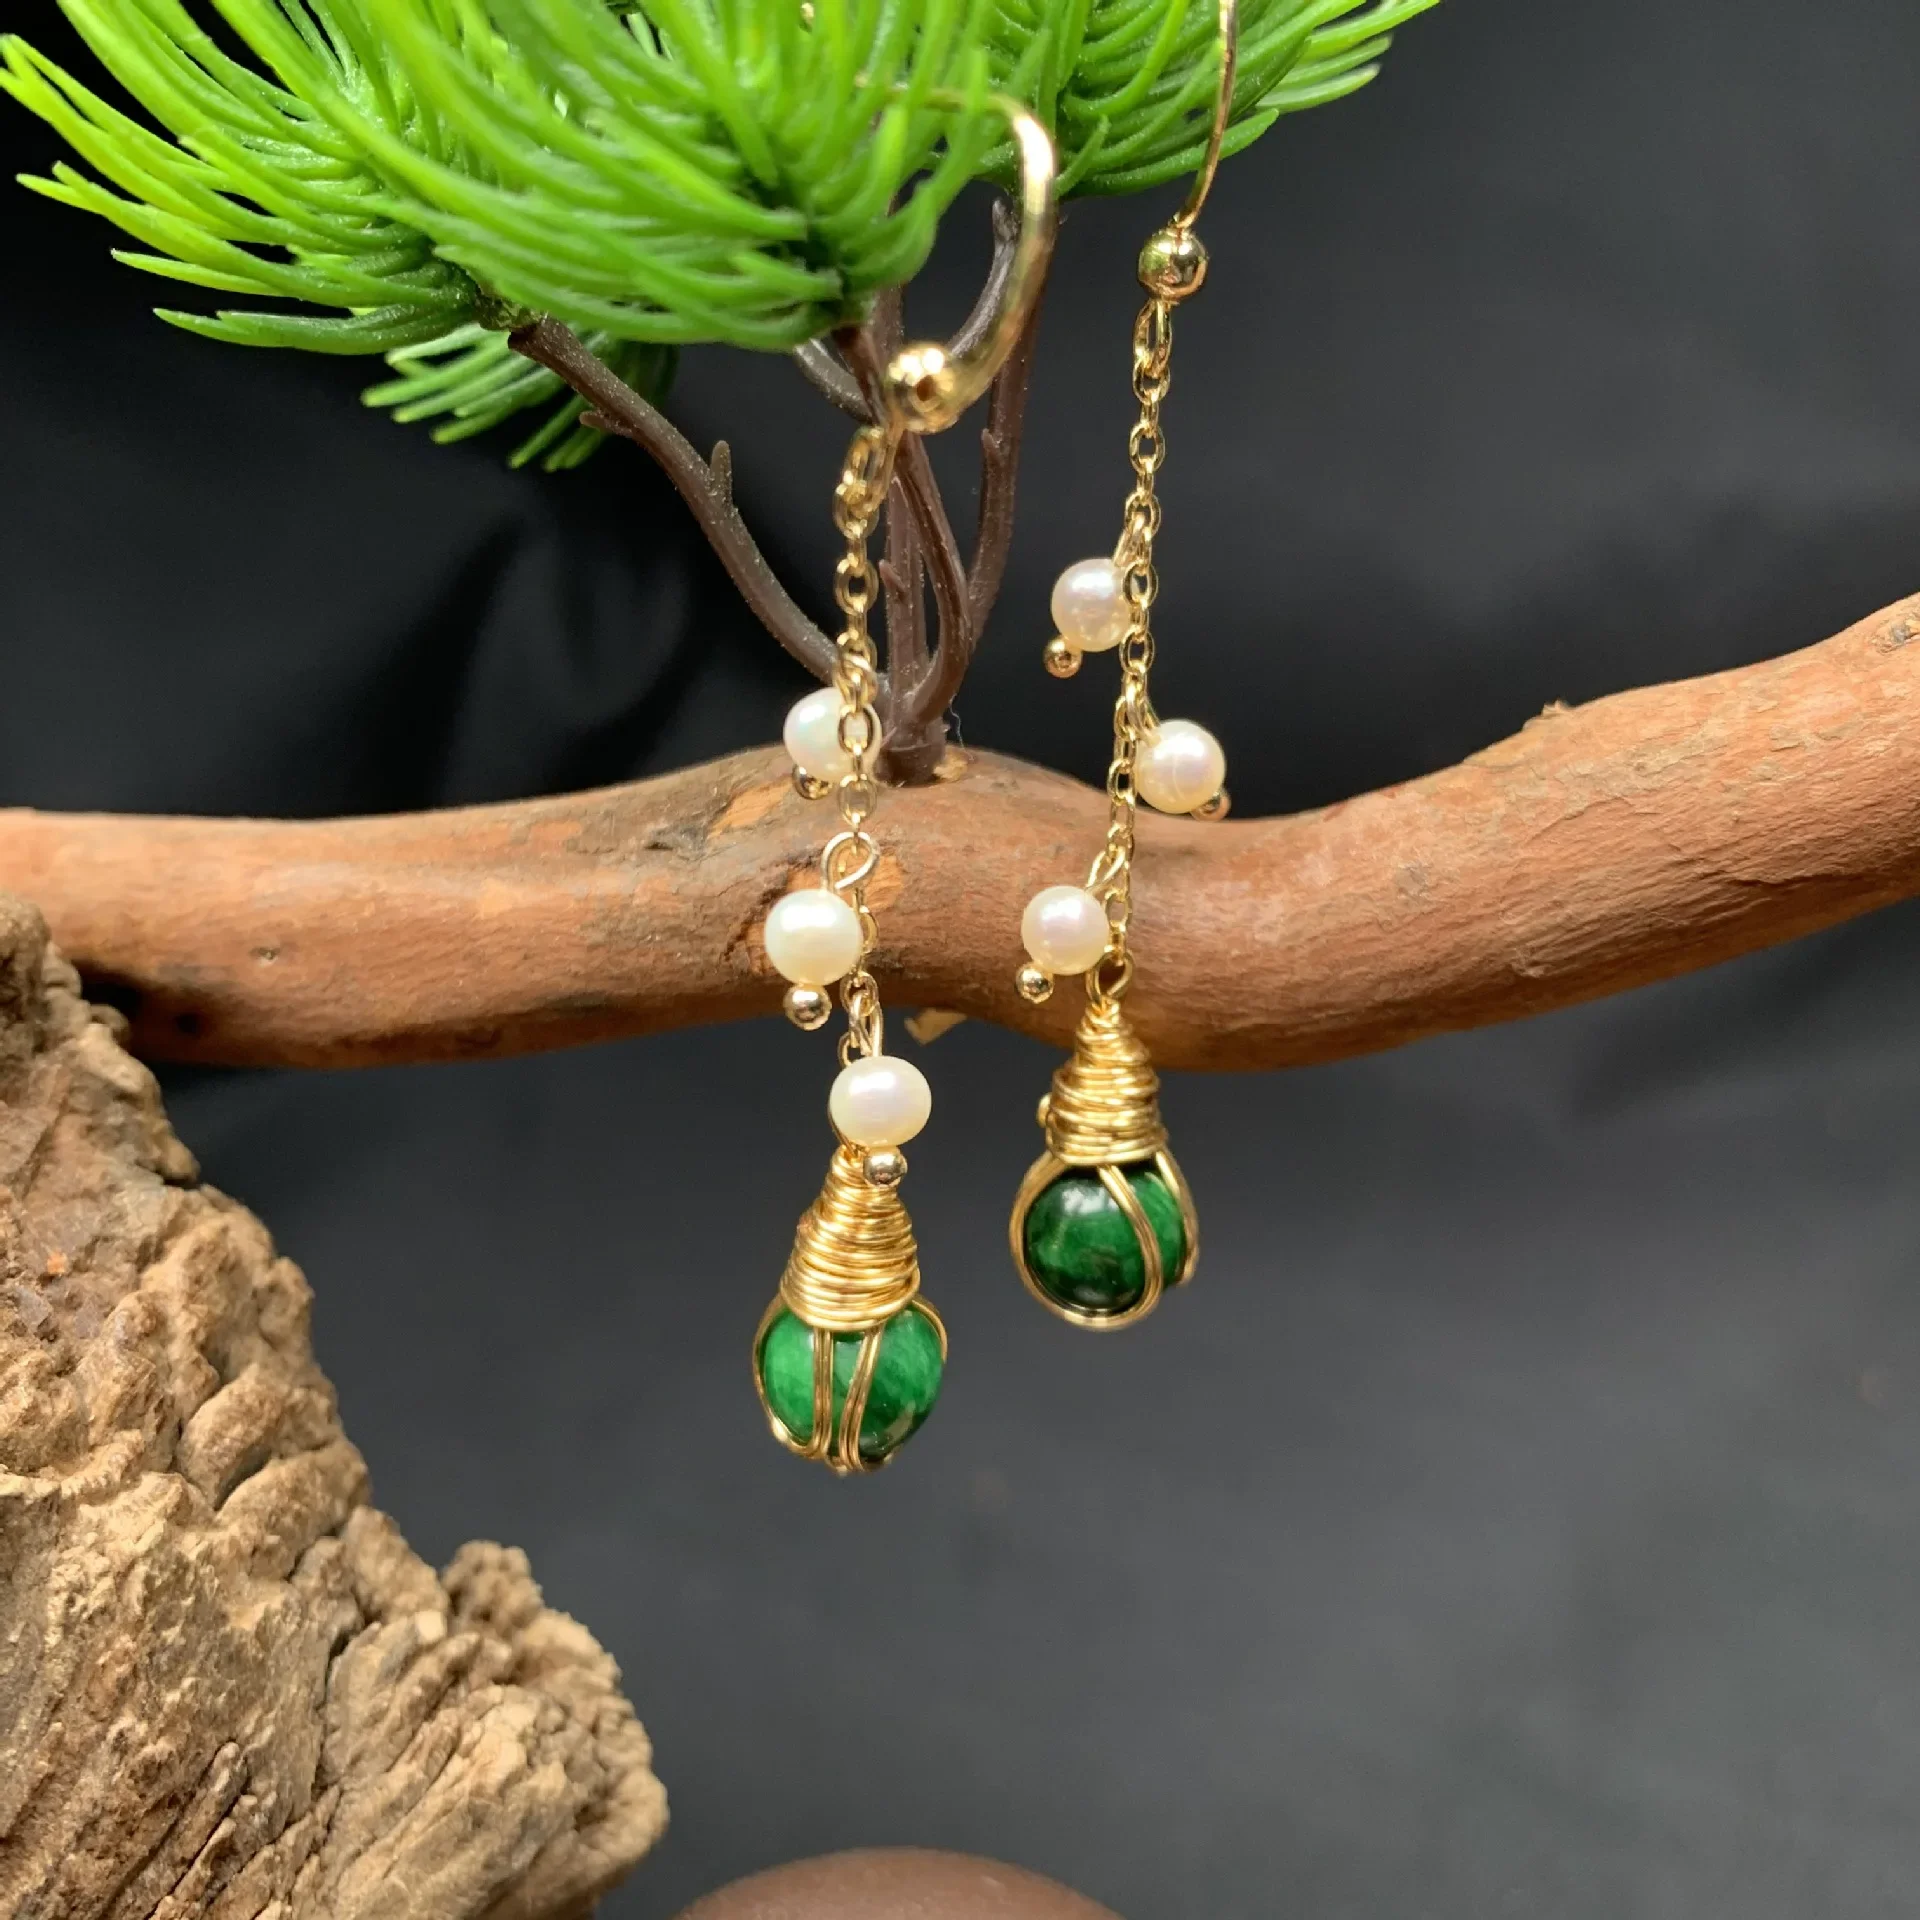 

Green Jade Earrings for Women Amulet Gifts Natural Emerald Chinese Jewelry Gift Beads Carved 925 Silver Stone Real Pearl